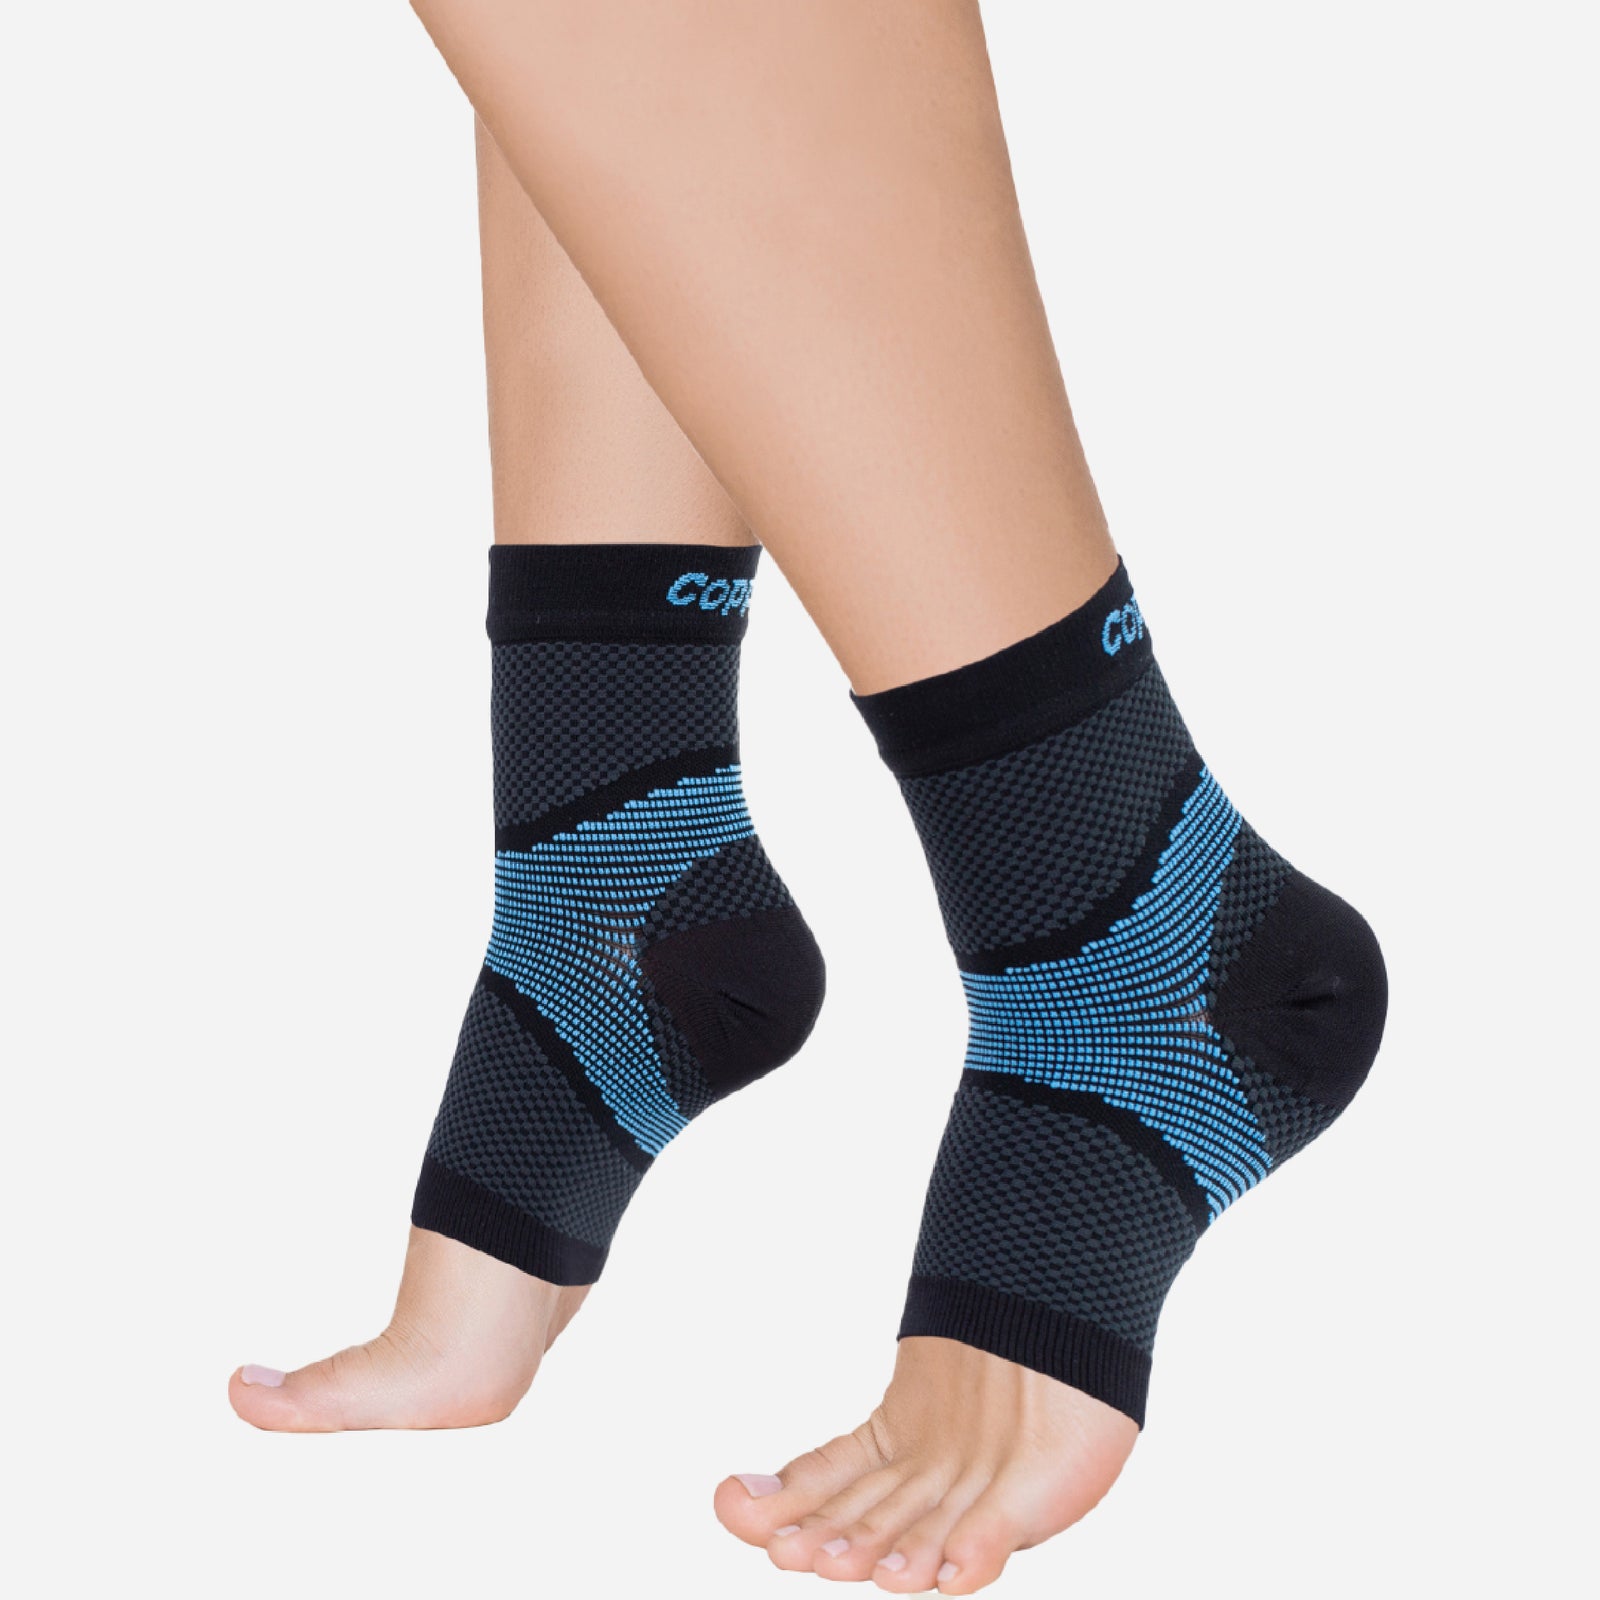 Modetro Sports Socks Foot Care Compression Sock Sleeve with Arch